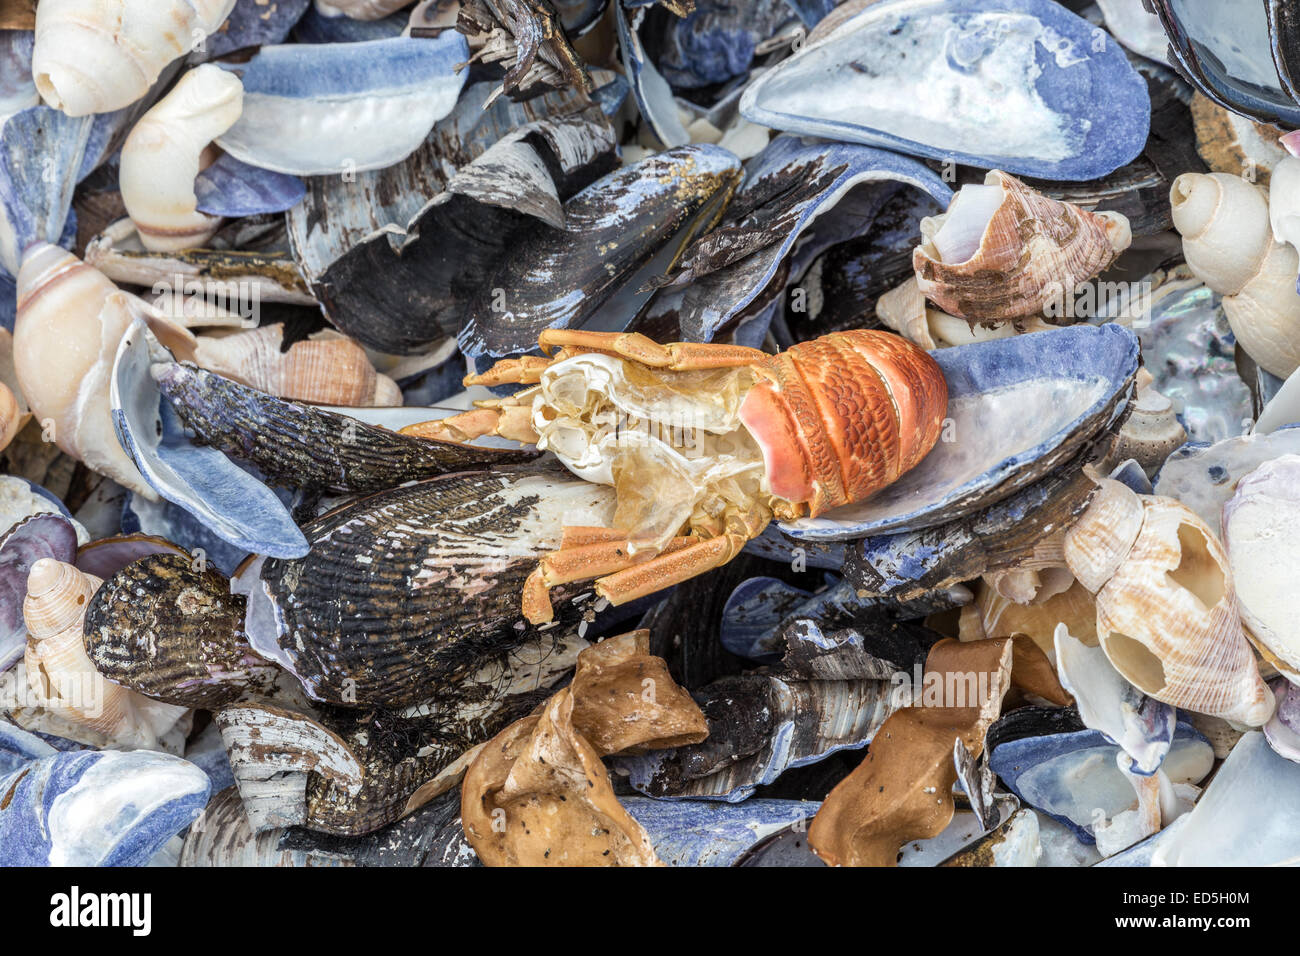 Crayfish, whelks and White Mussel shells, Britannia bay, Western Cape, South Africa Stock Photo